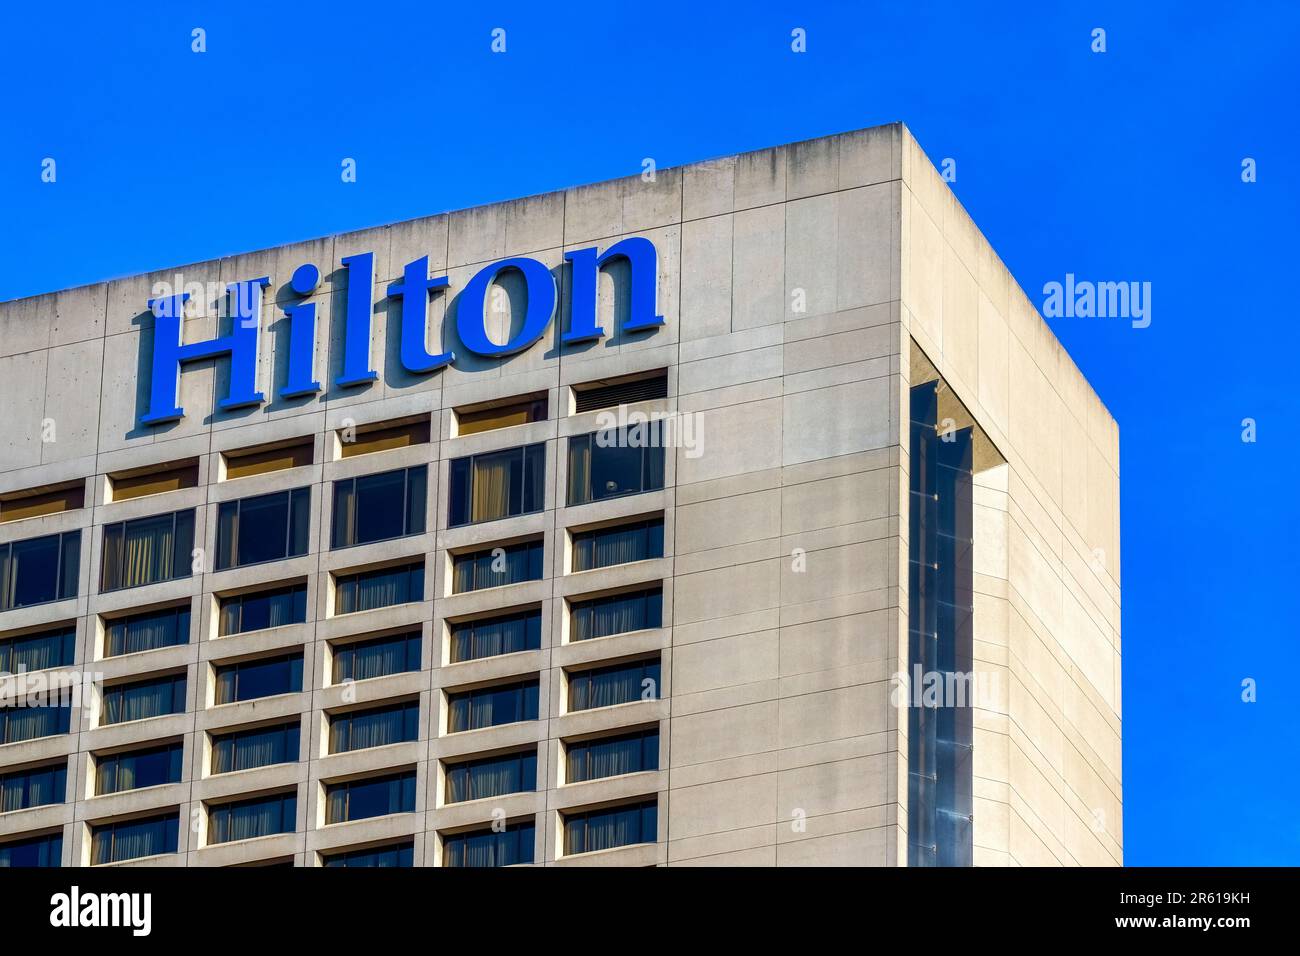 Toronto, Canada - May 13, 2023: The top portion of a building displaying a bold 'Hilton' sign. The building has glass windows; no people are in the sc Stock Photo